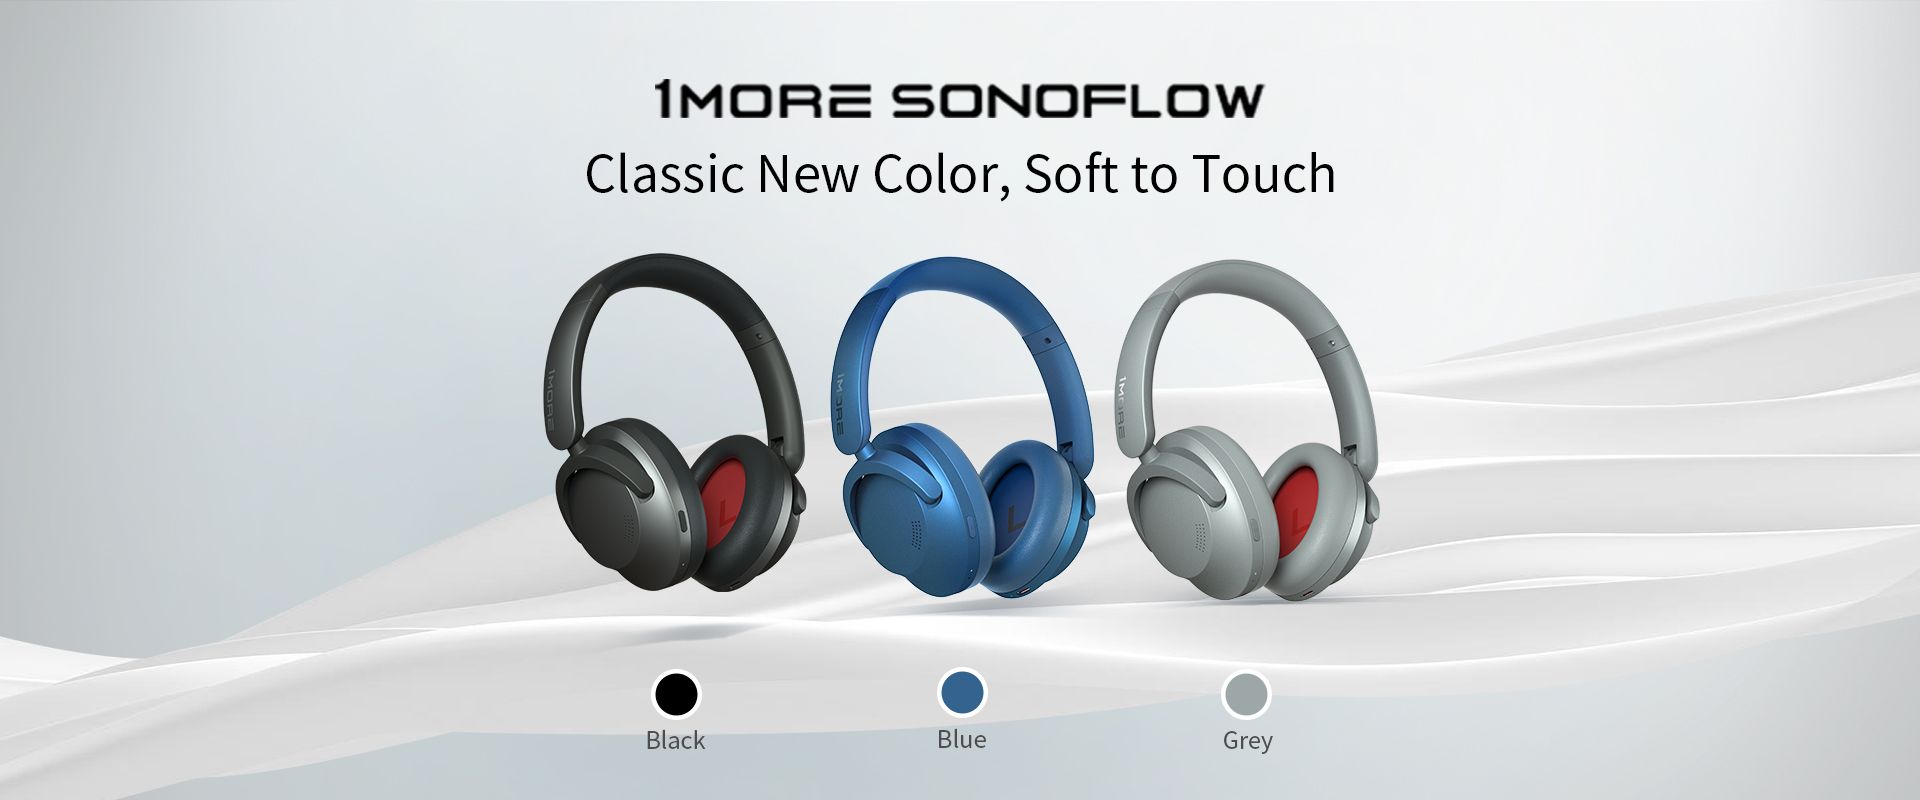 1MORE-SonoFlow-Active-Noise-Cancelling-Headphones-Bluetooth-Headphones-with-LDAC-for-Hi-Res-Wireless-Audio-70H-Playtime-Clear-Calls-Blue-13